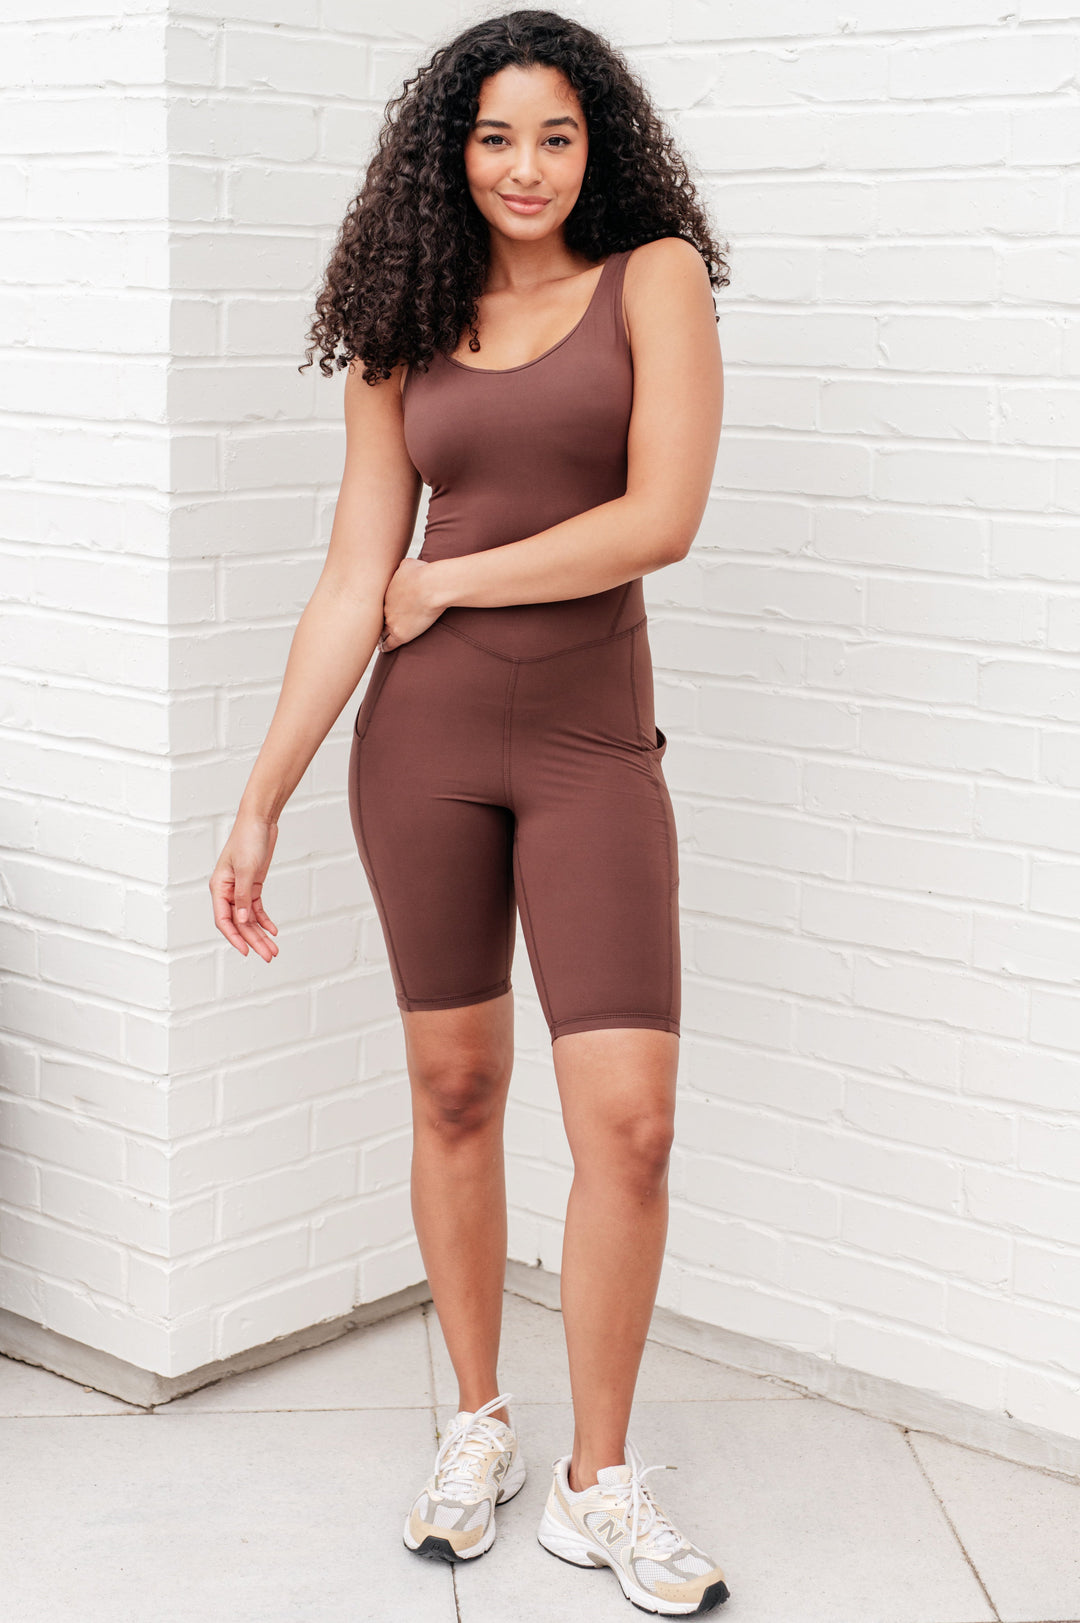 Sun Salutations Body Suit in Java-Athleisure-Inspired by Justeen-Women's Clothing Boutique in Chicago, Illinois